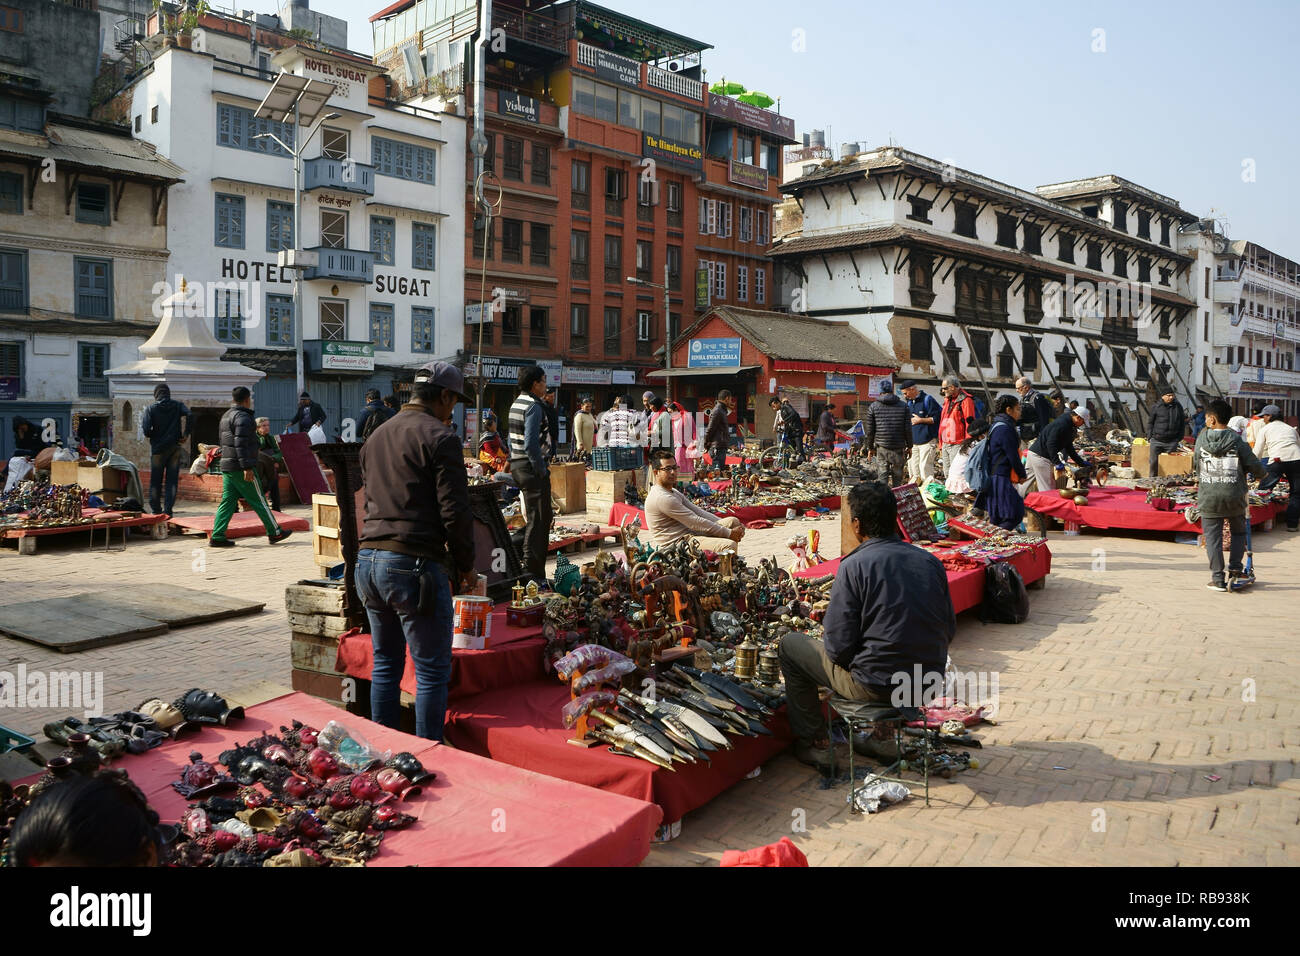 Souvenir market for tourists on Durbar square or Basantipur square, in front of the old Royal Palace, Kathmandu, Nepal Stock Photo